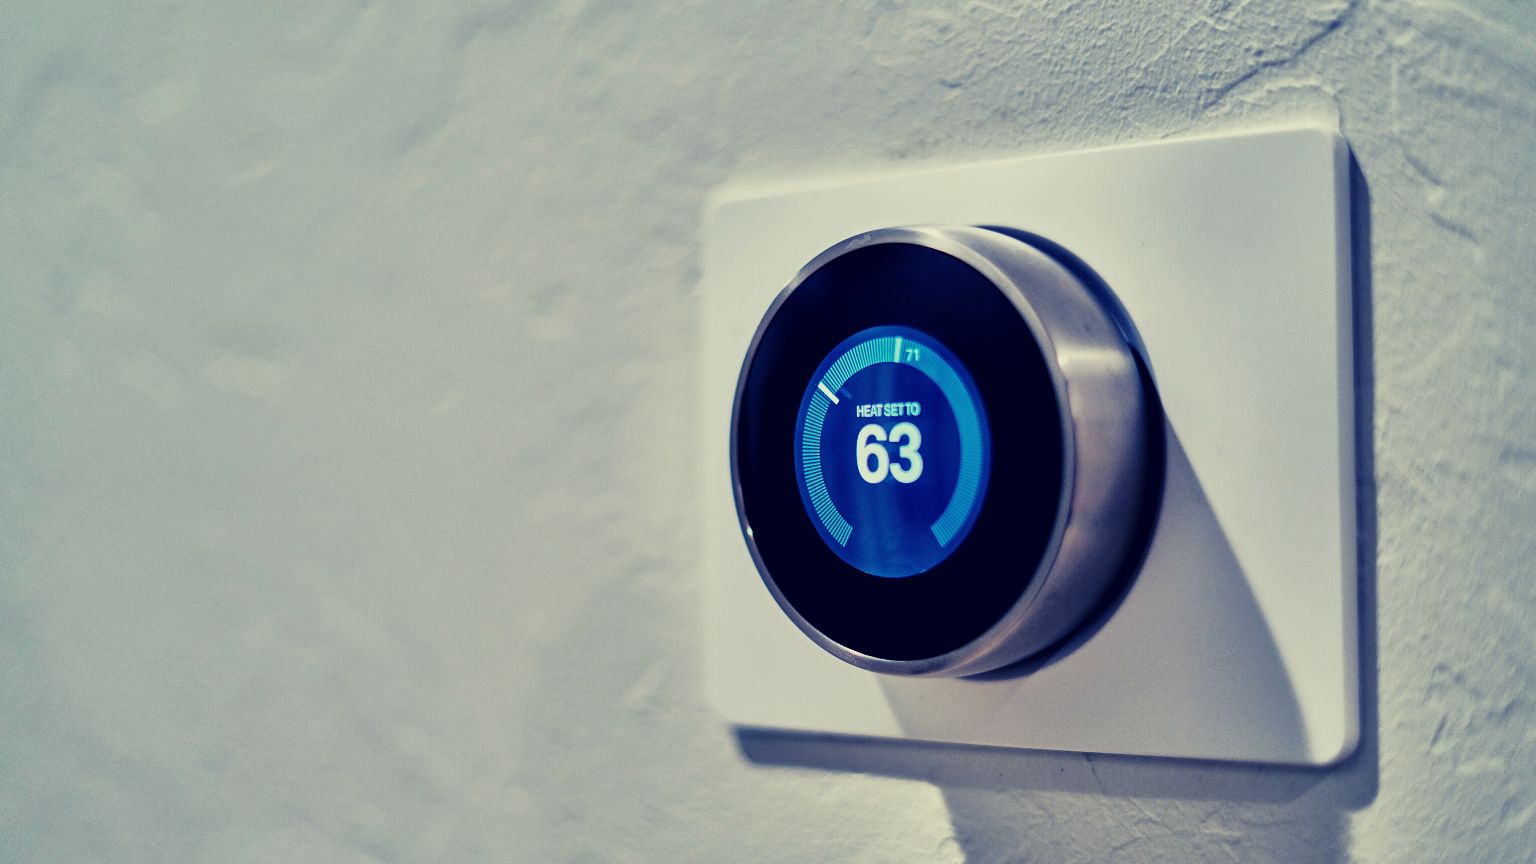 Renters are finding smart home tech used against them